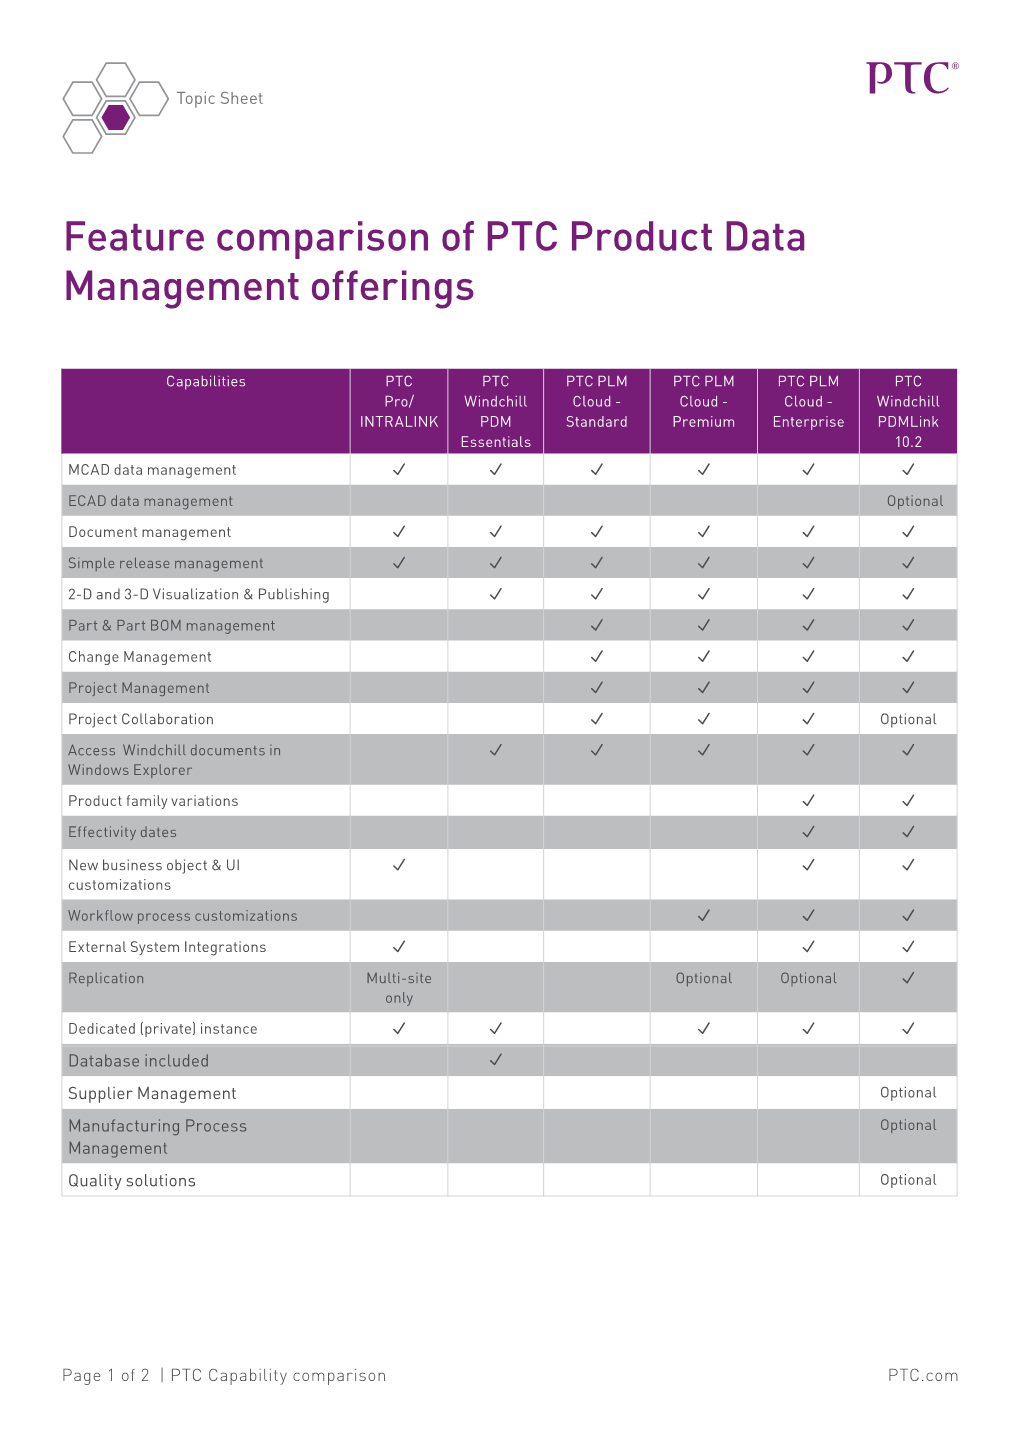 Feature Comparison of PTC Product Data Management Offerings